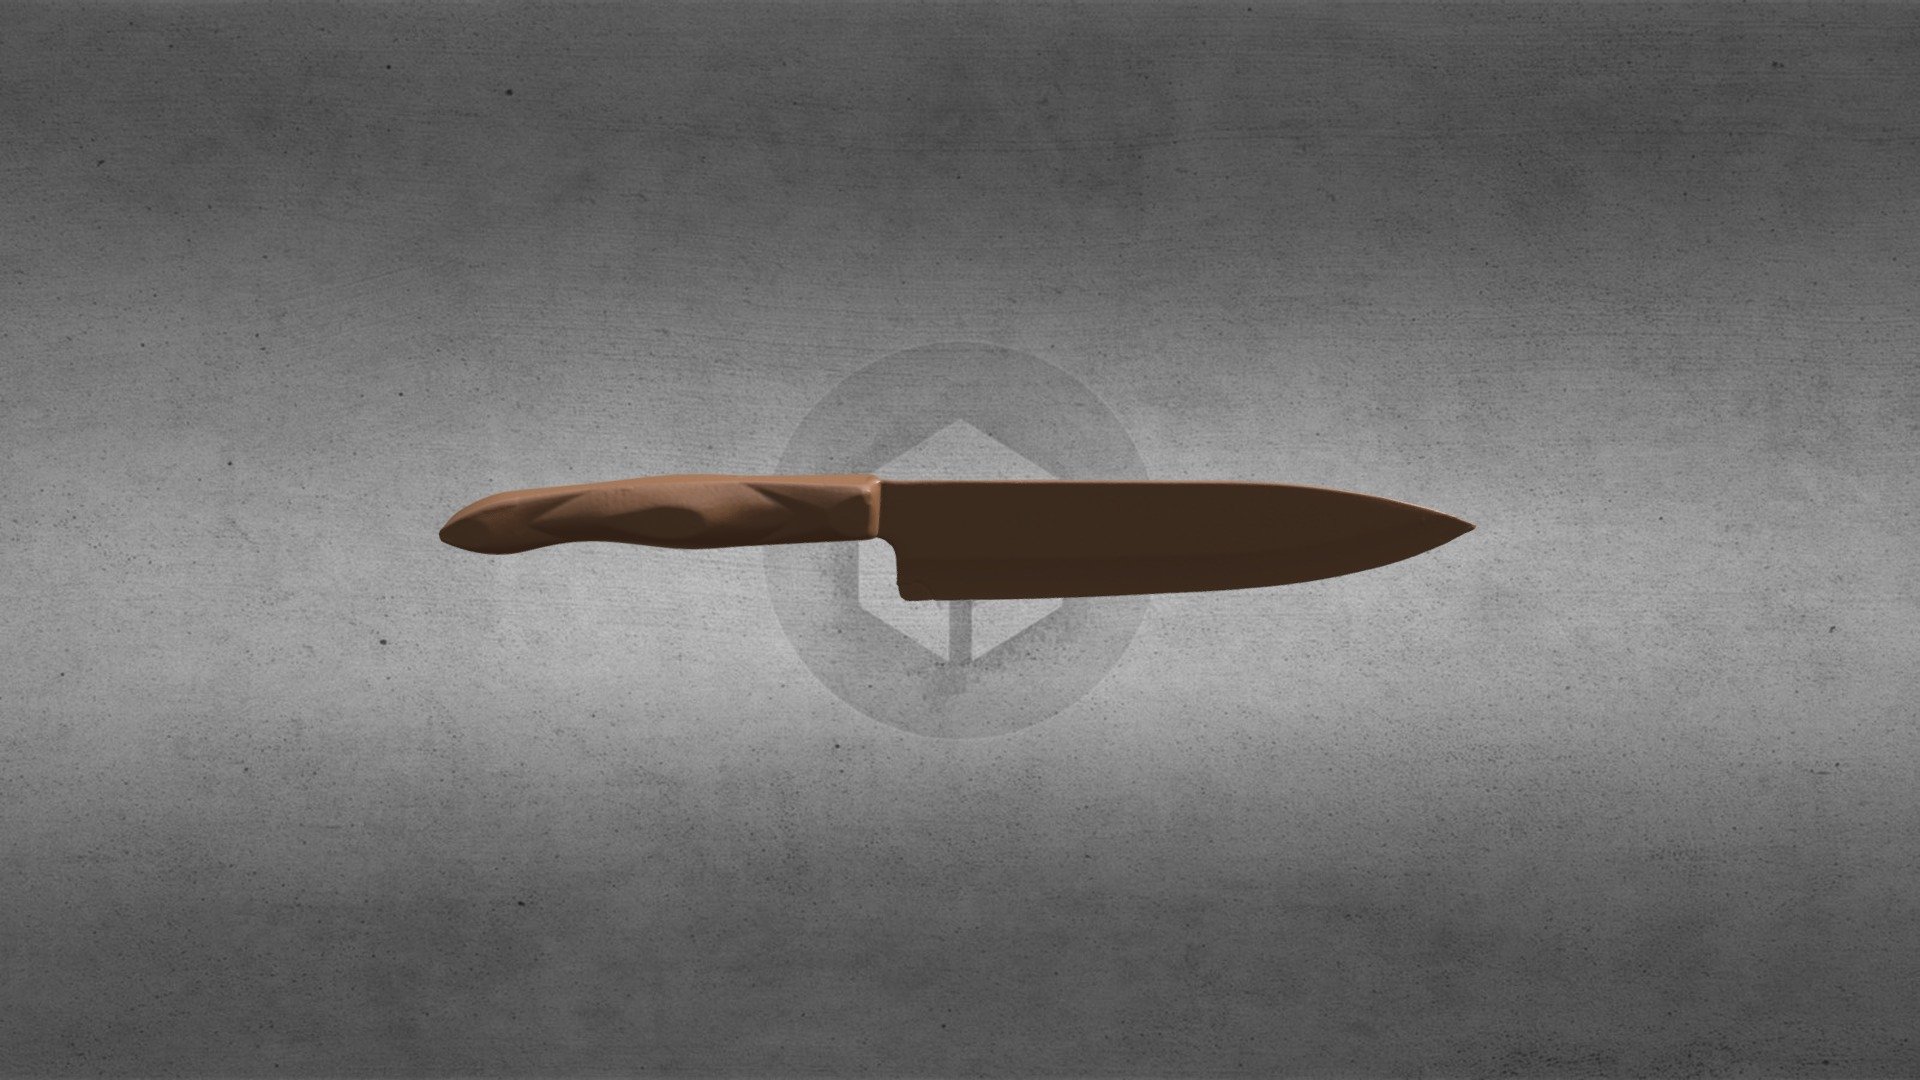 Cutco chefs knife
scanned using EinScan-Pro
low resolution and poly reduced for sketchfab upload 3d model